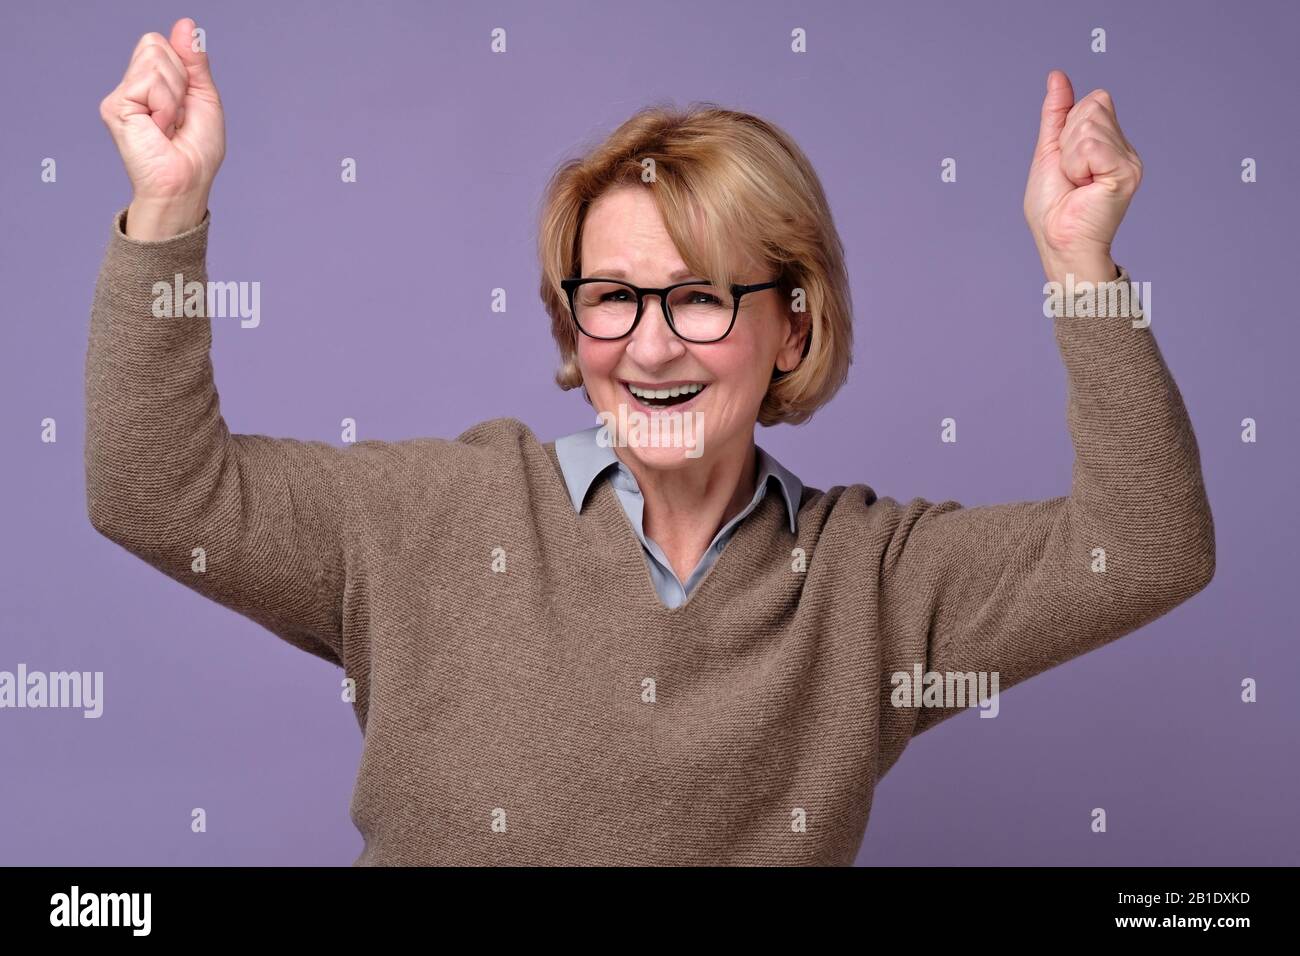 Mature senior woman doing a winner gesture holding fists up enjoying the moment on a colored background Stock Photo